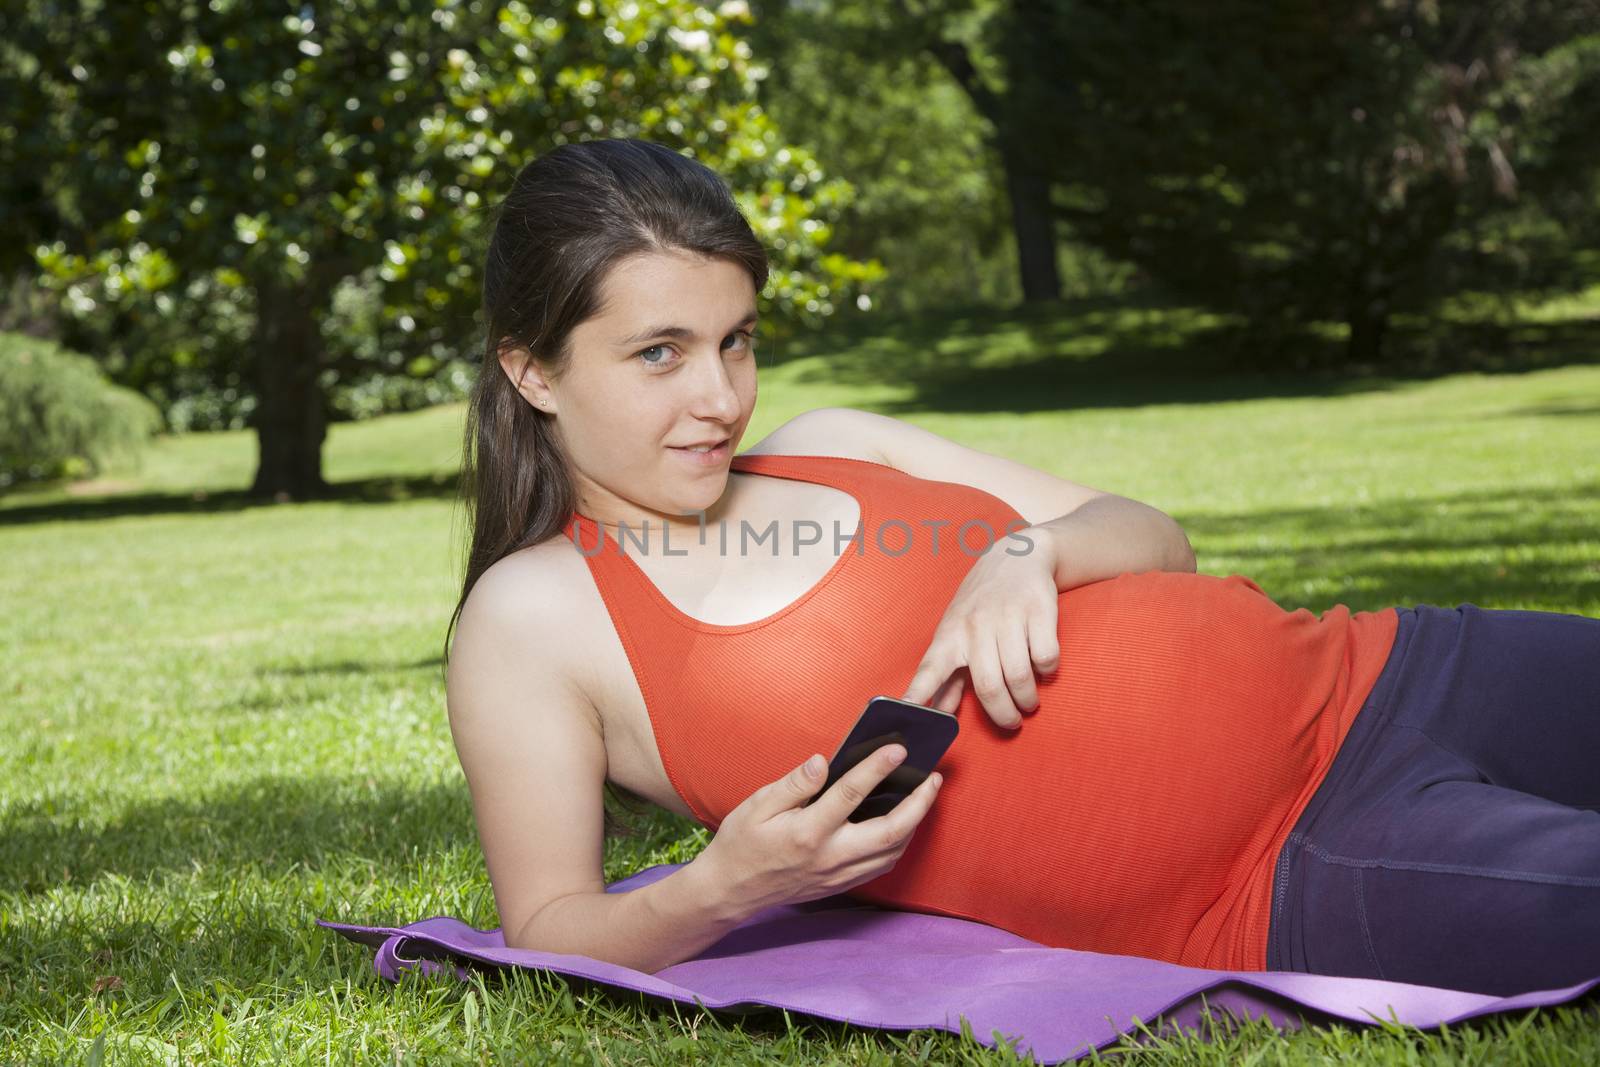 pregnant young woman with orange shirt touching smartphone at a park in Madrid Spain Europe